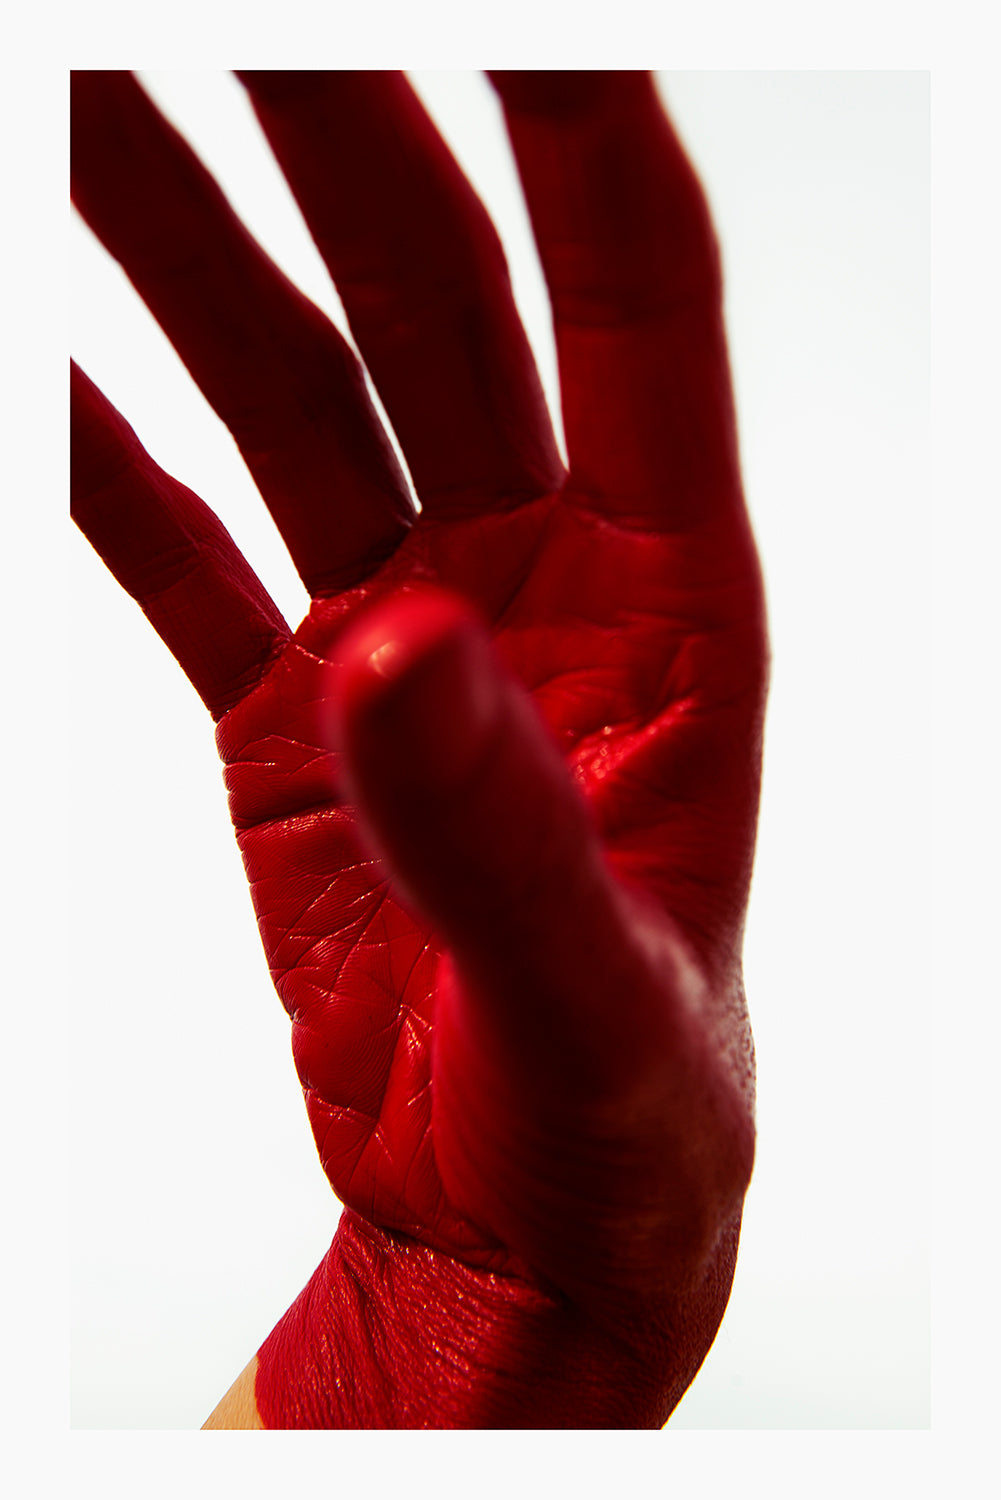 Marked 3 - limited Red Series - photography